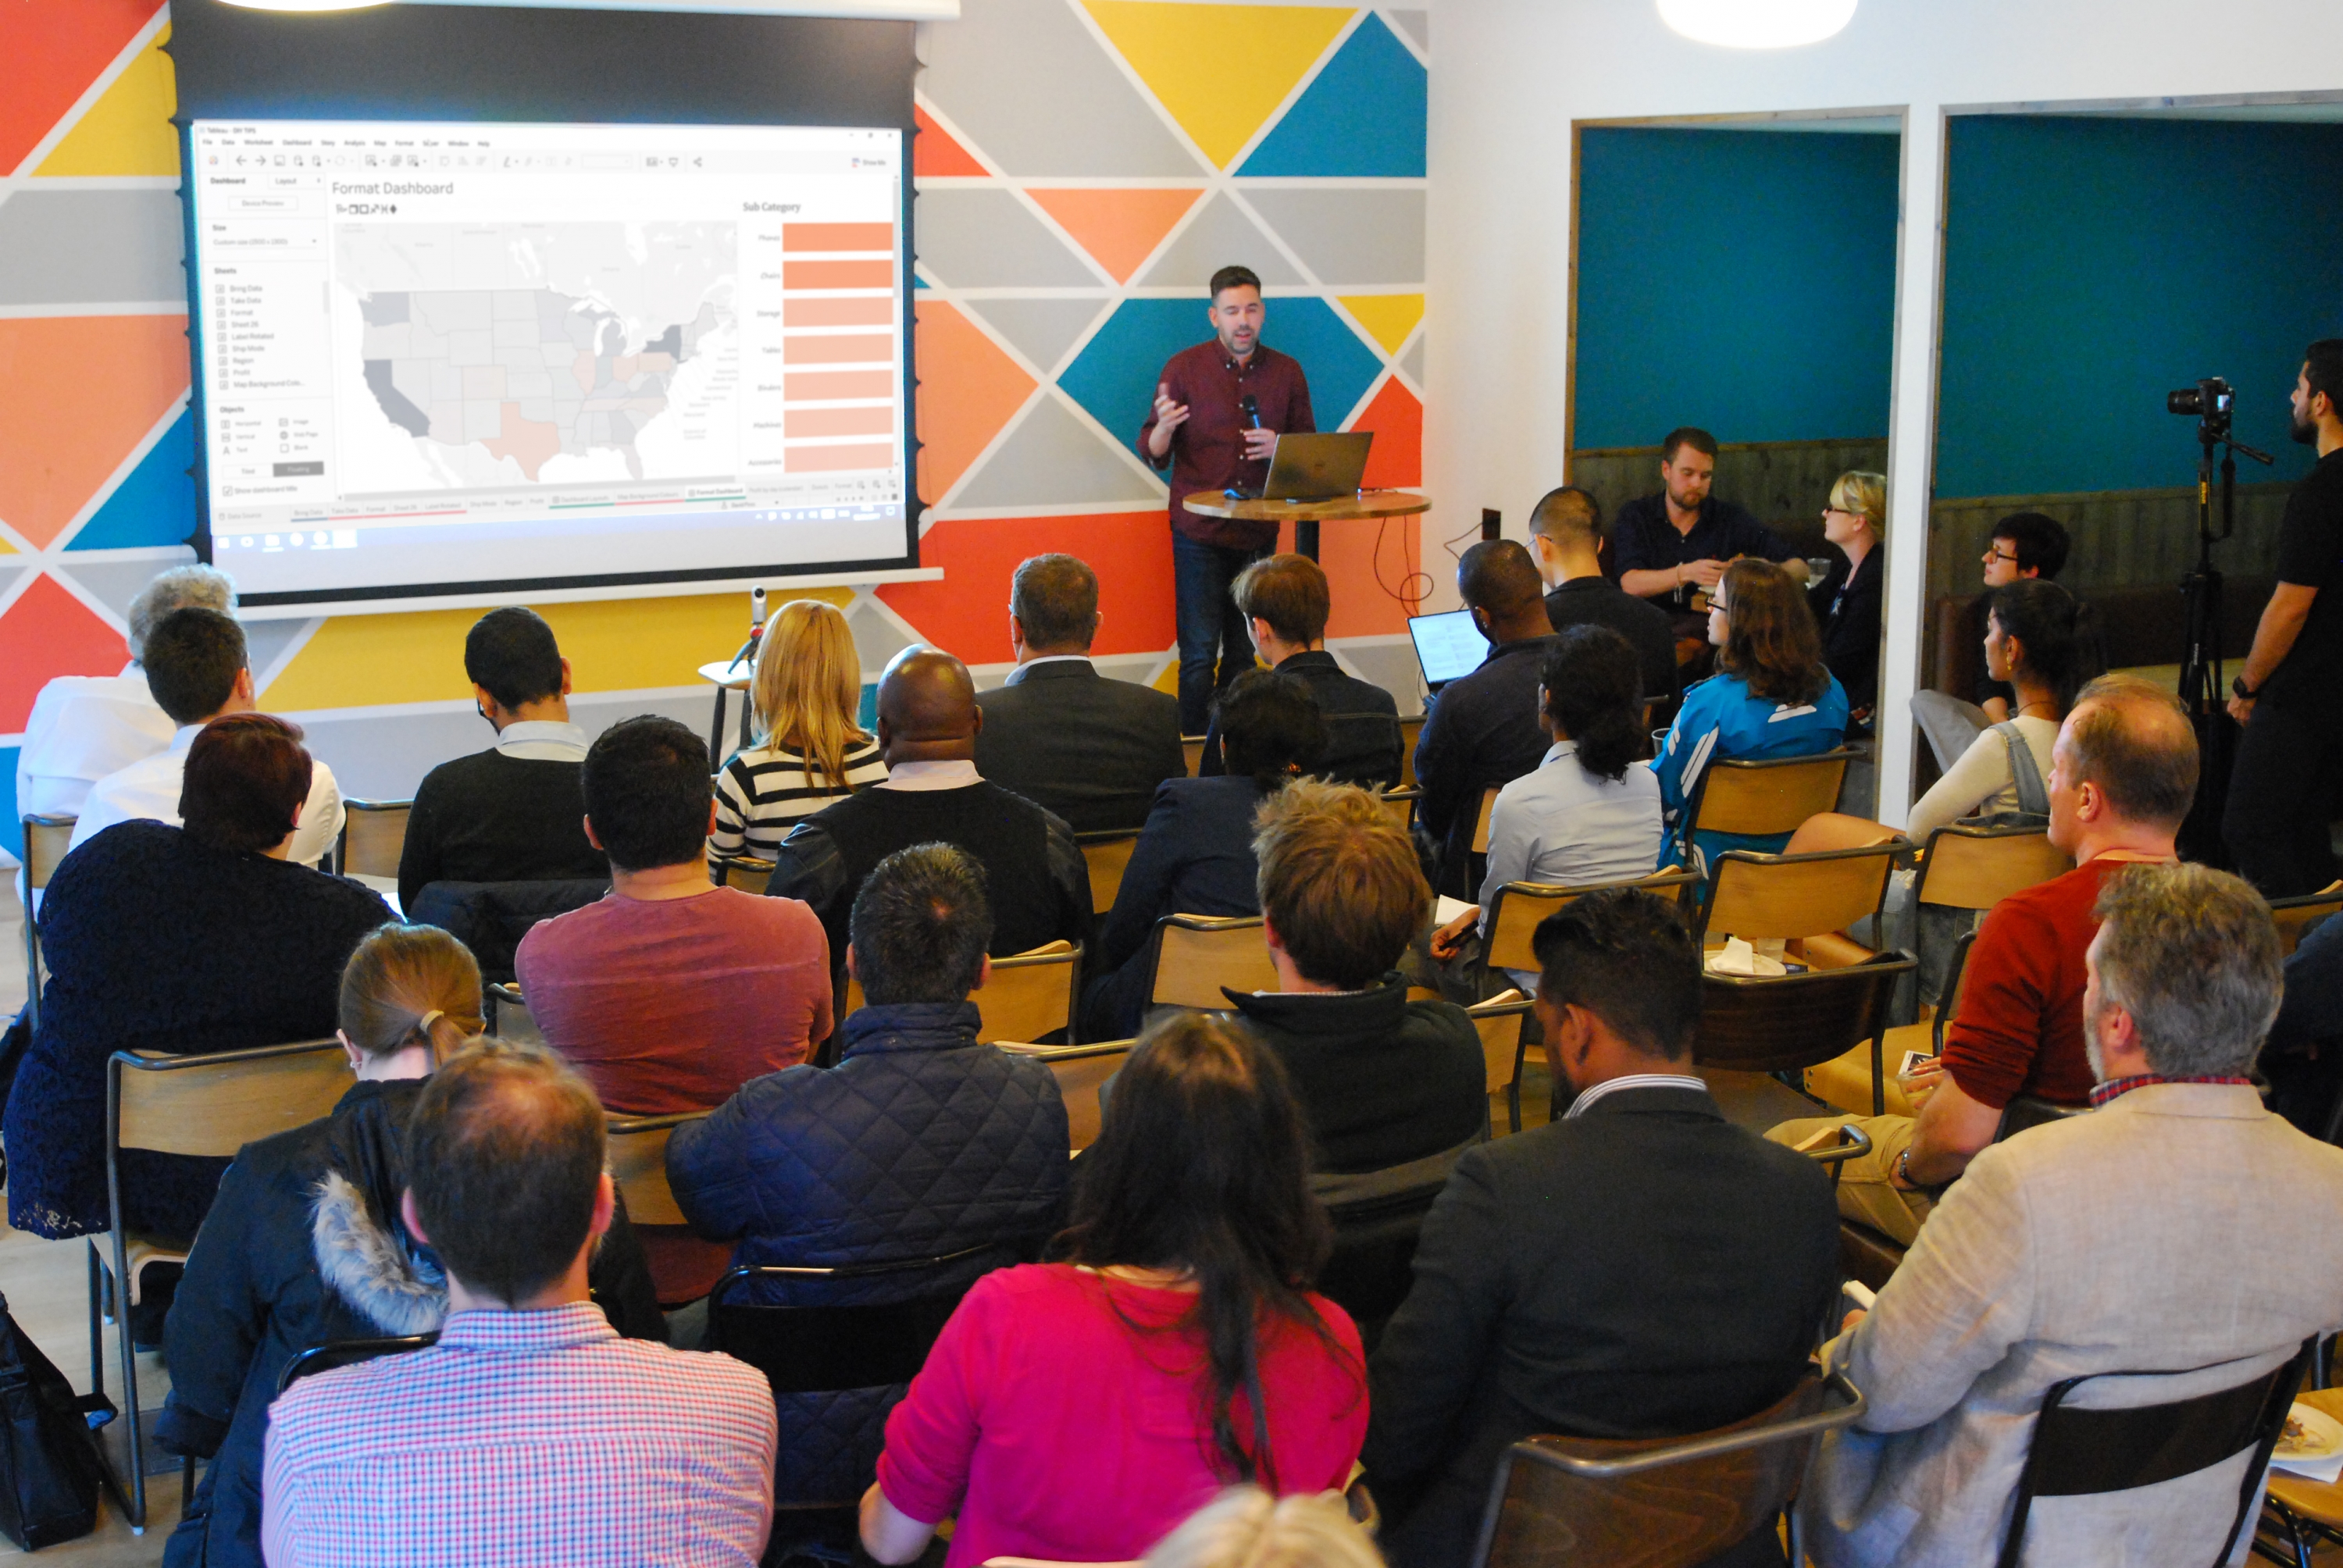 London Data, Insight and You event recap